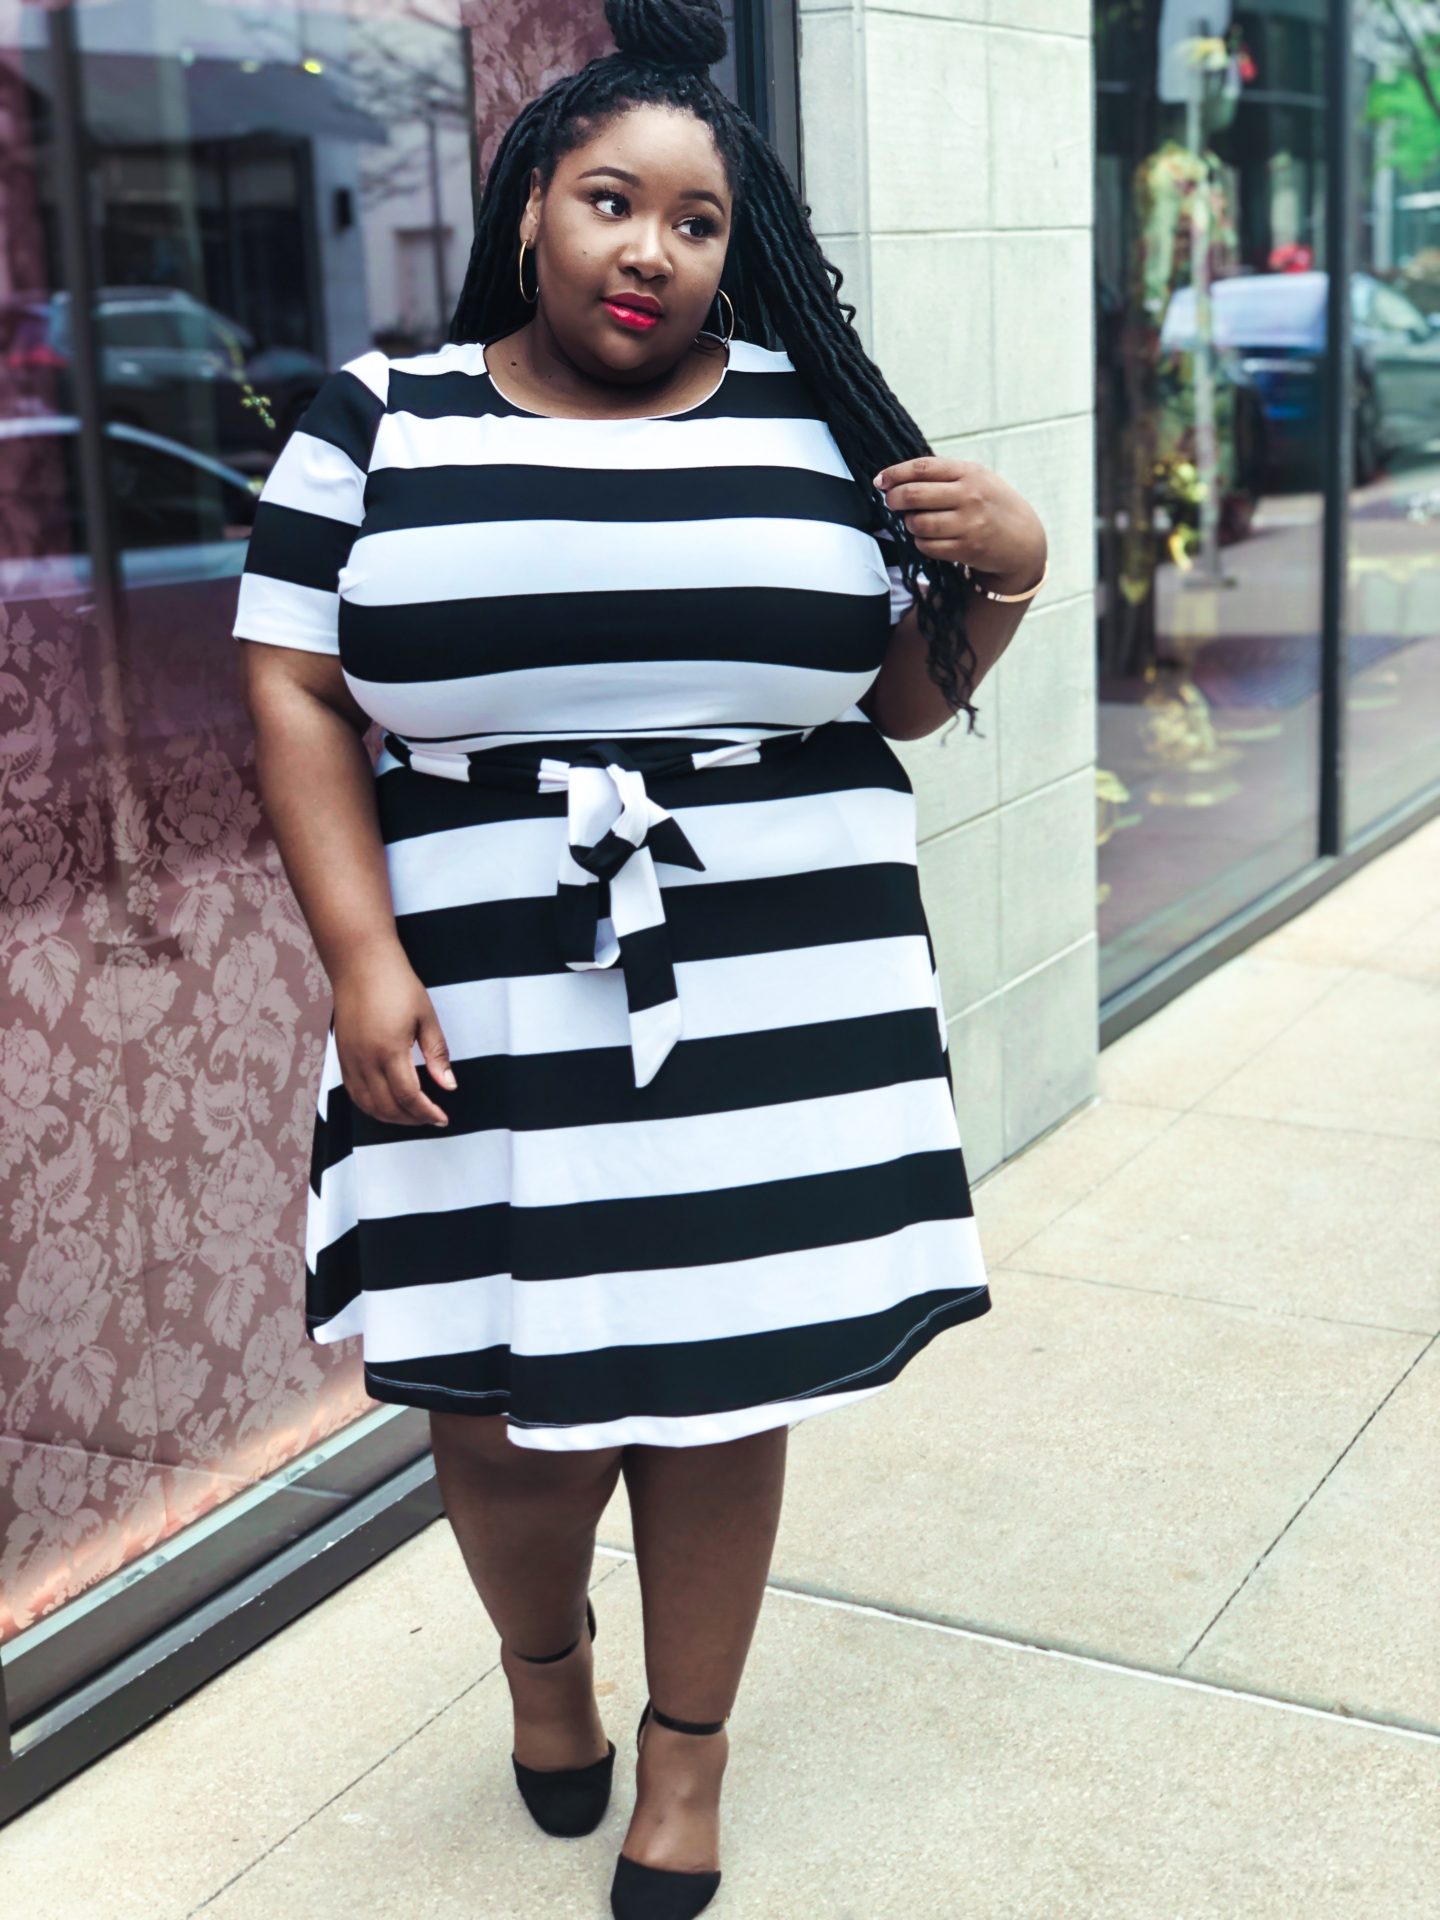 Plus Size Fashion  Beauticurve X Lane Bryant Collection - From